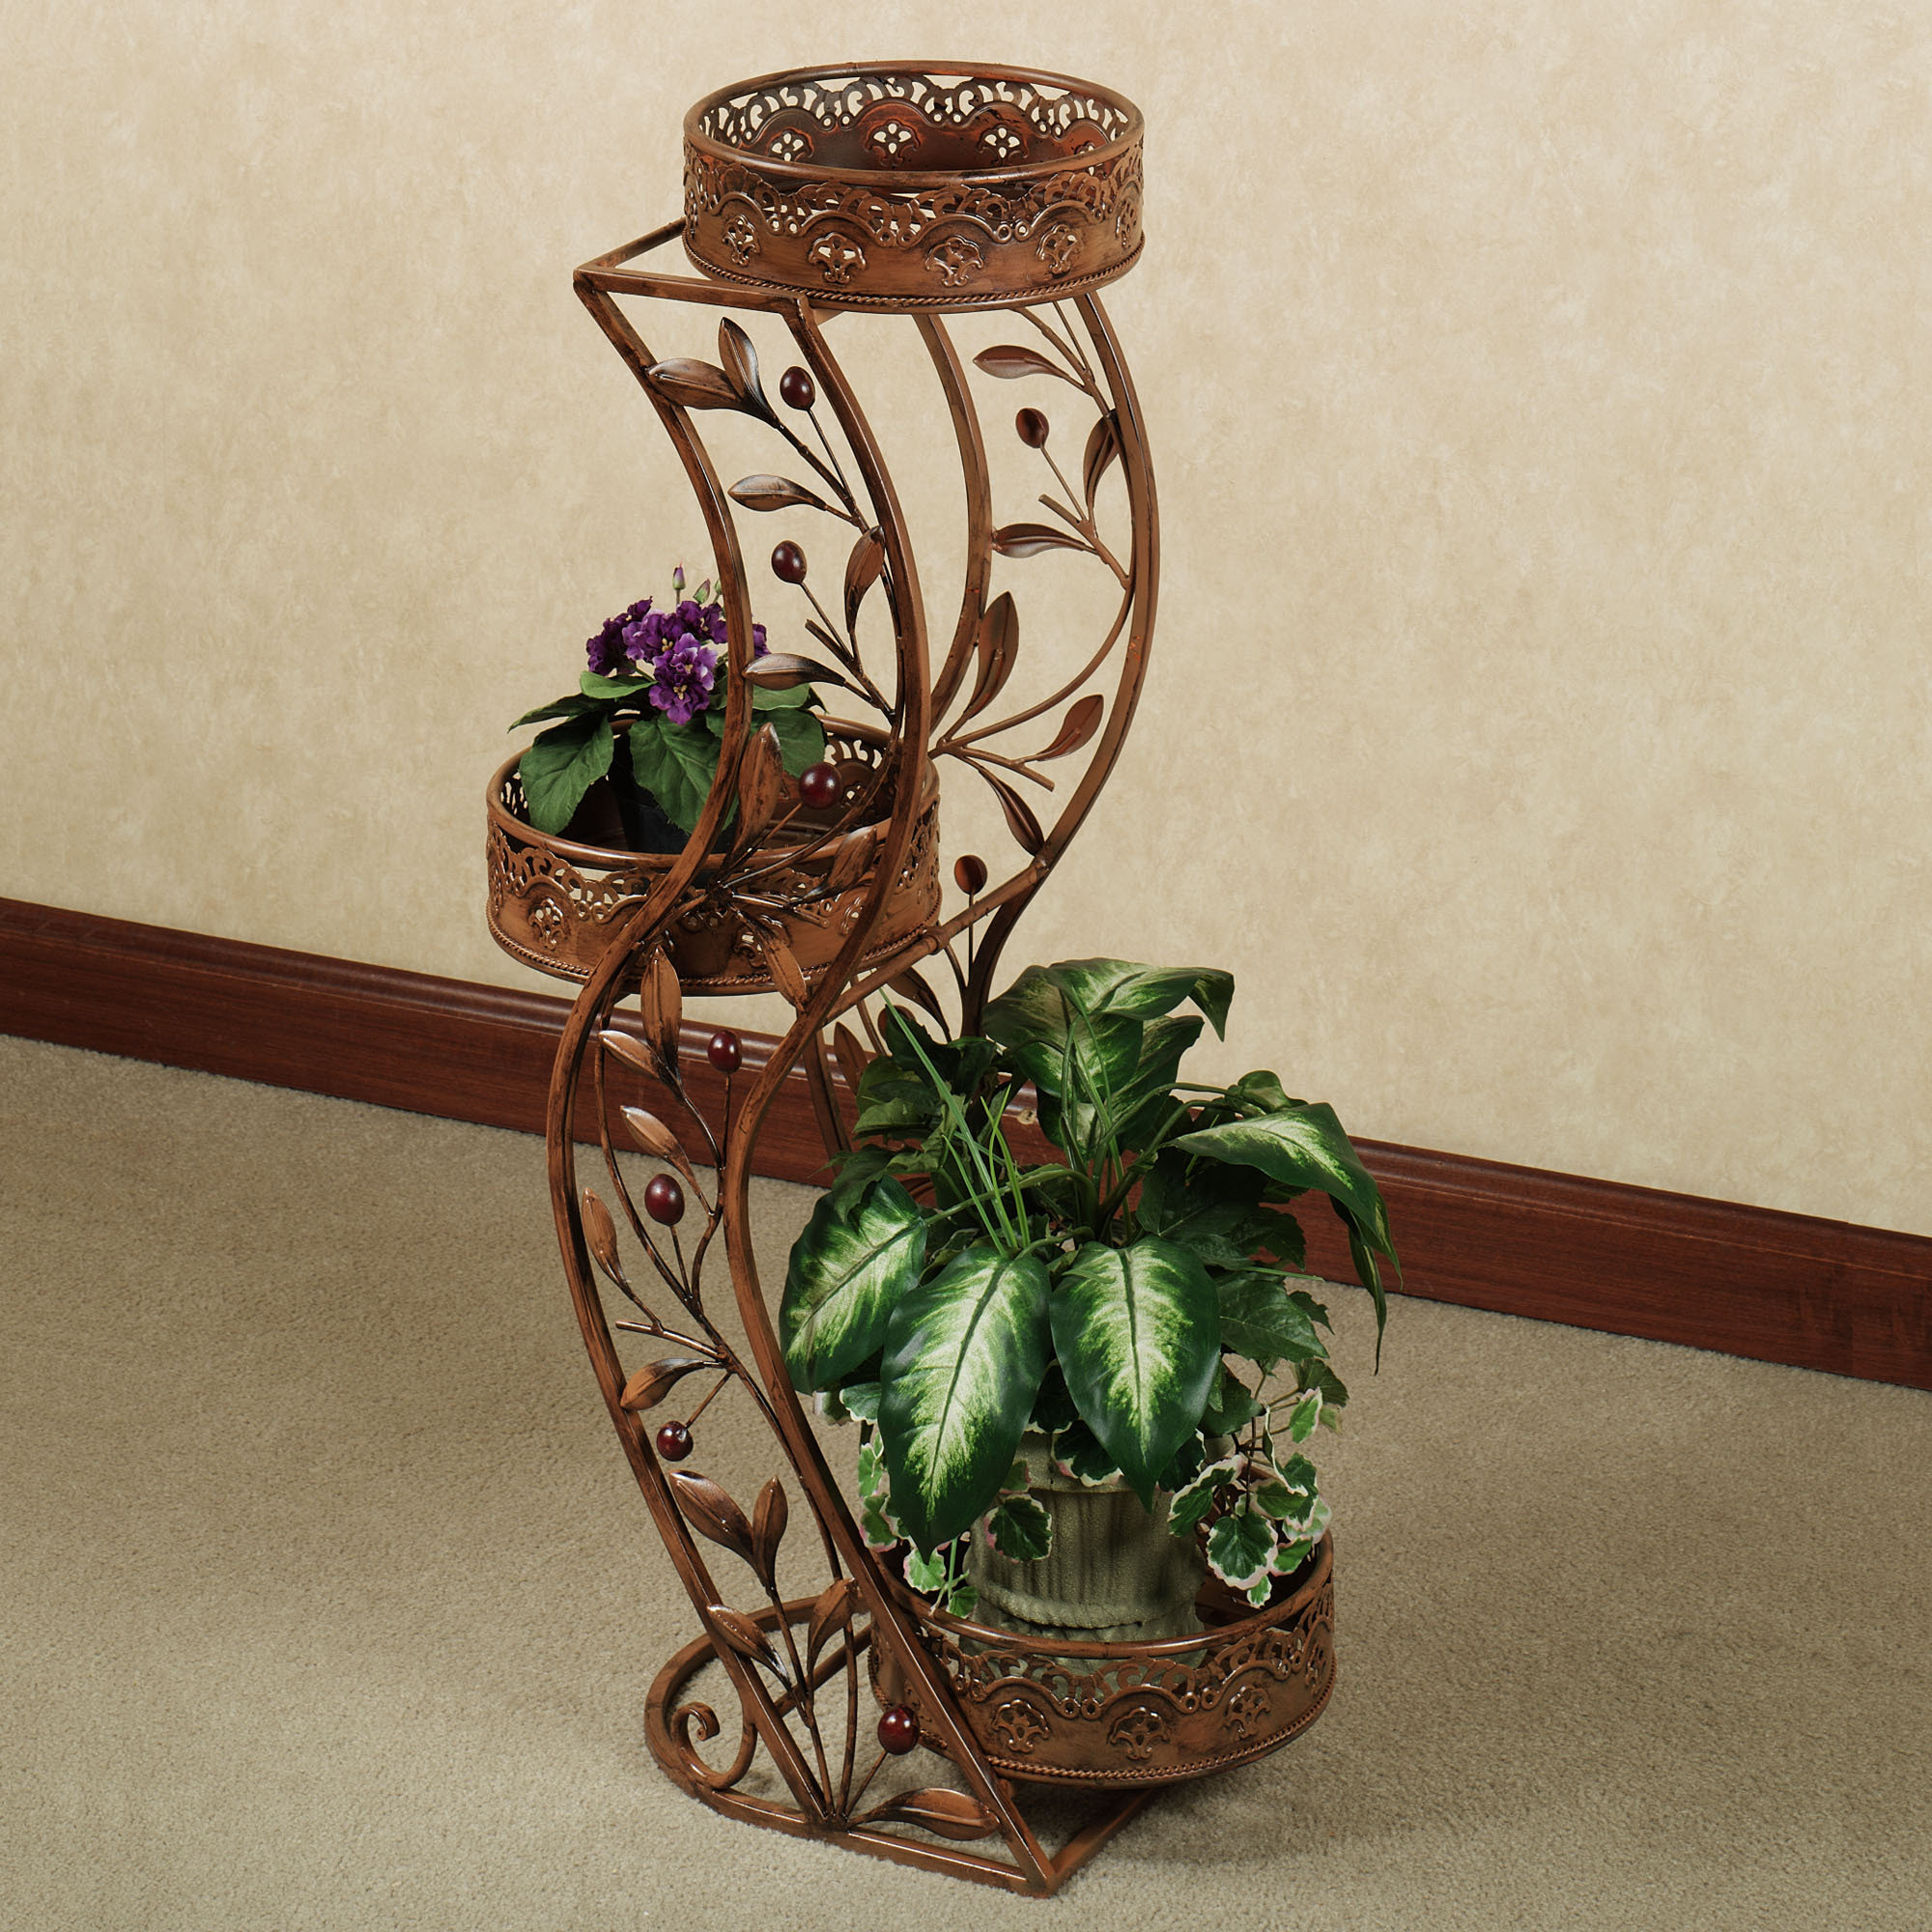 Cantabria branch tiered plant stand